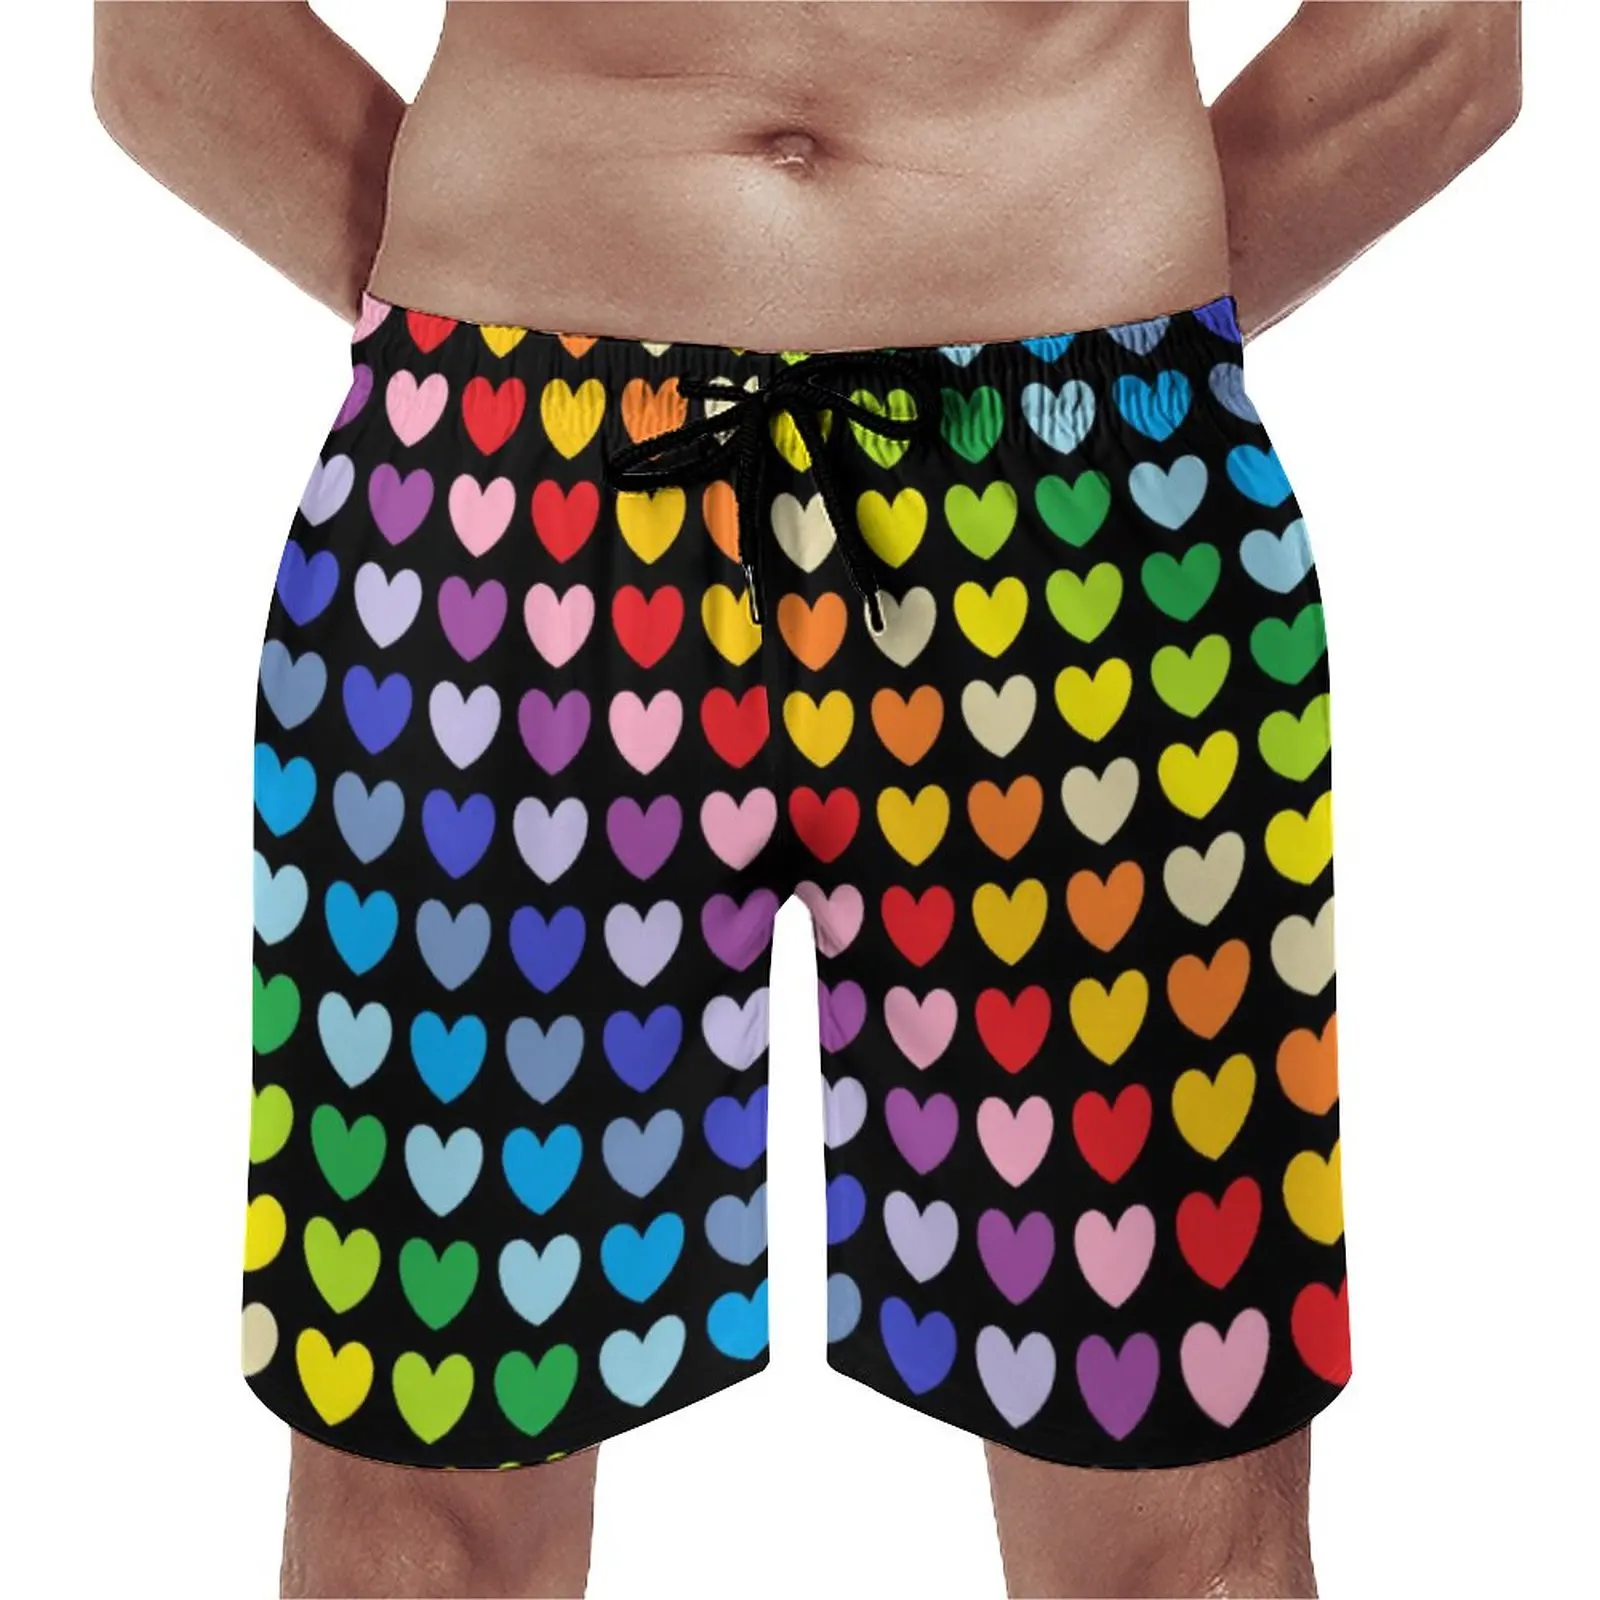 

Rainbow Heart Board Shorts Summer Colorful Hearts Print Running Surf Board Short Pants Quick Drying Funny Plus Size Swim Trunks